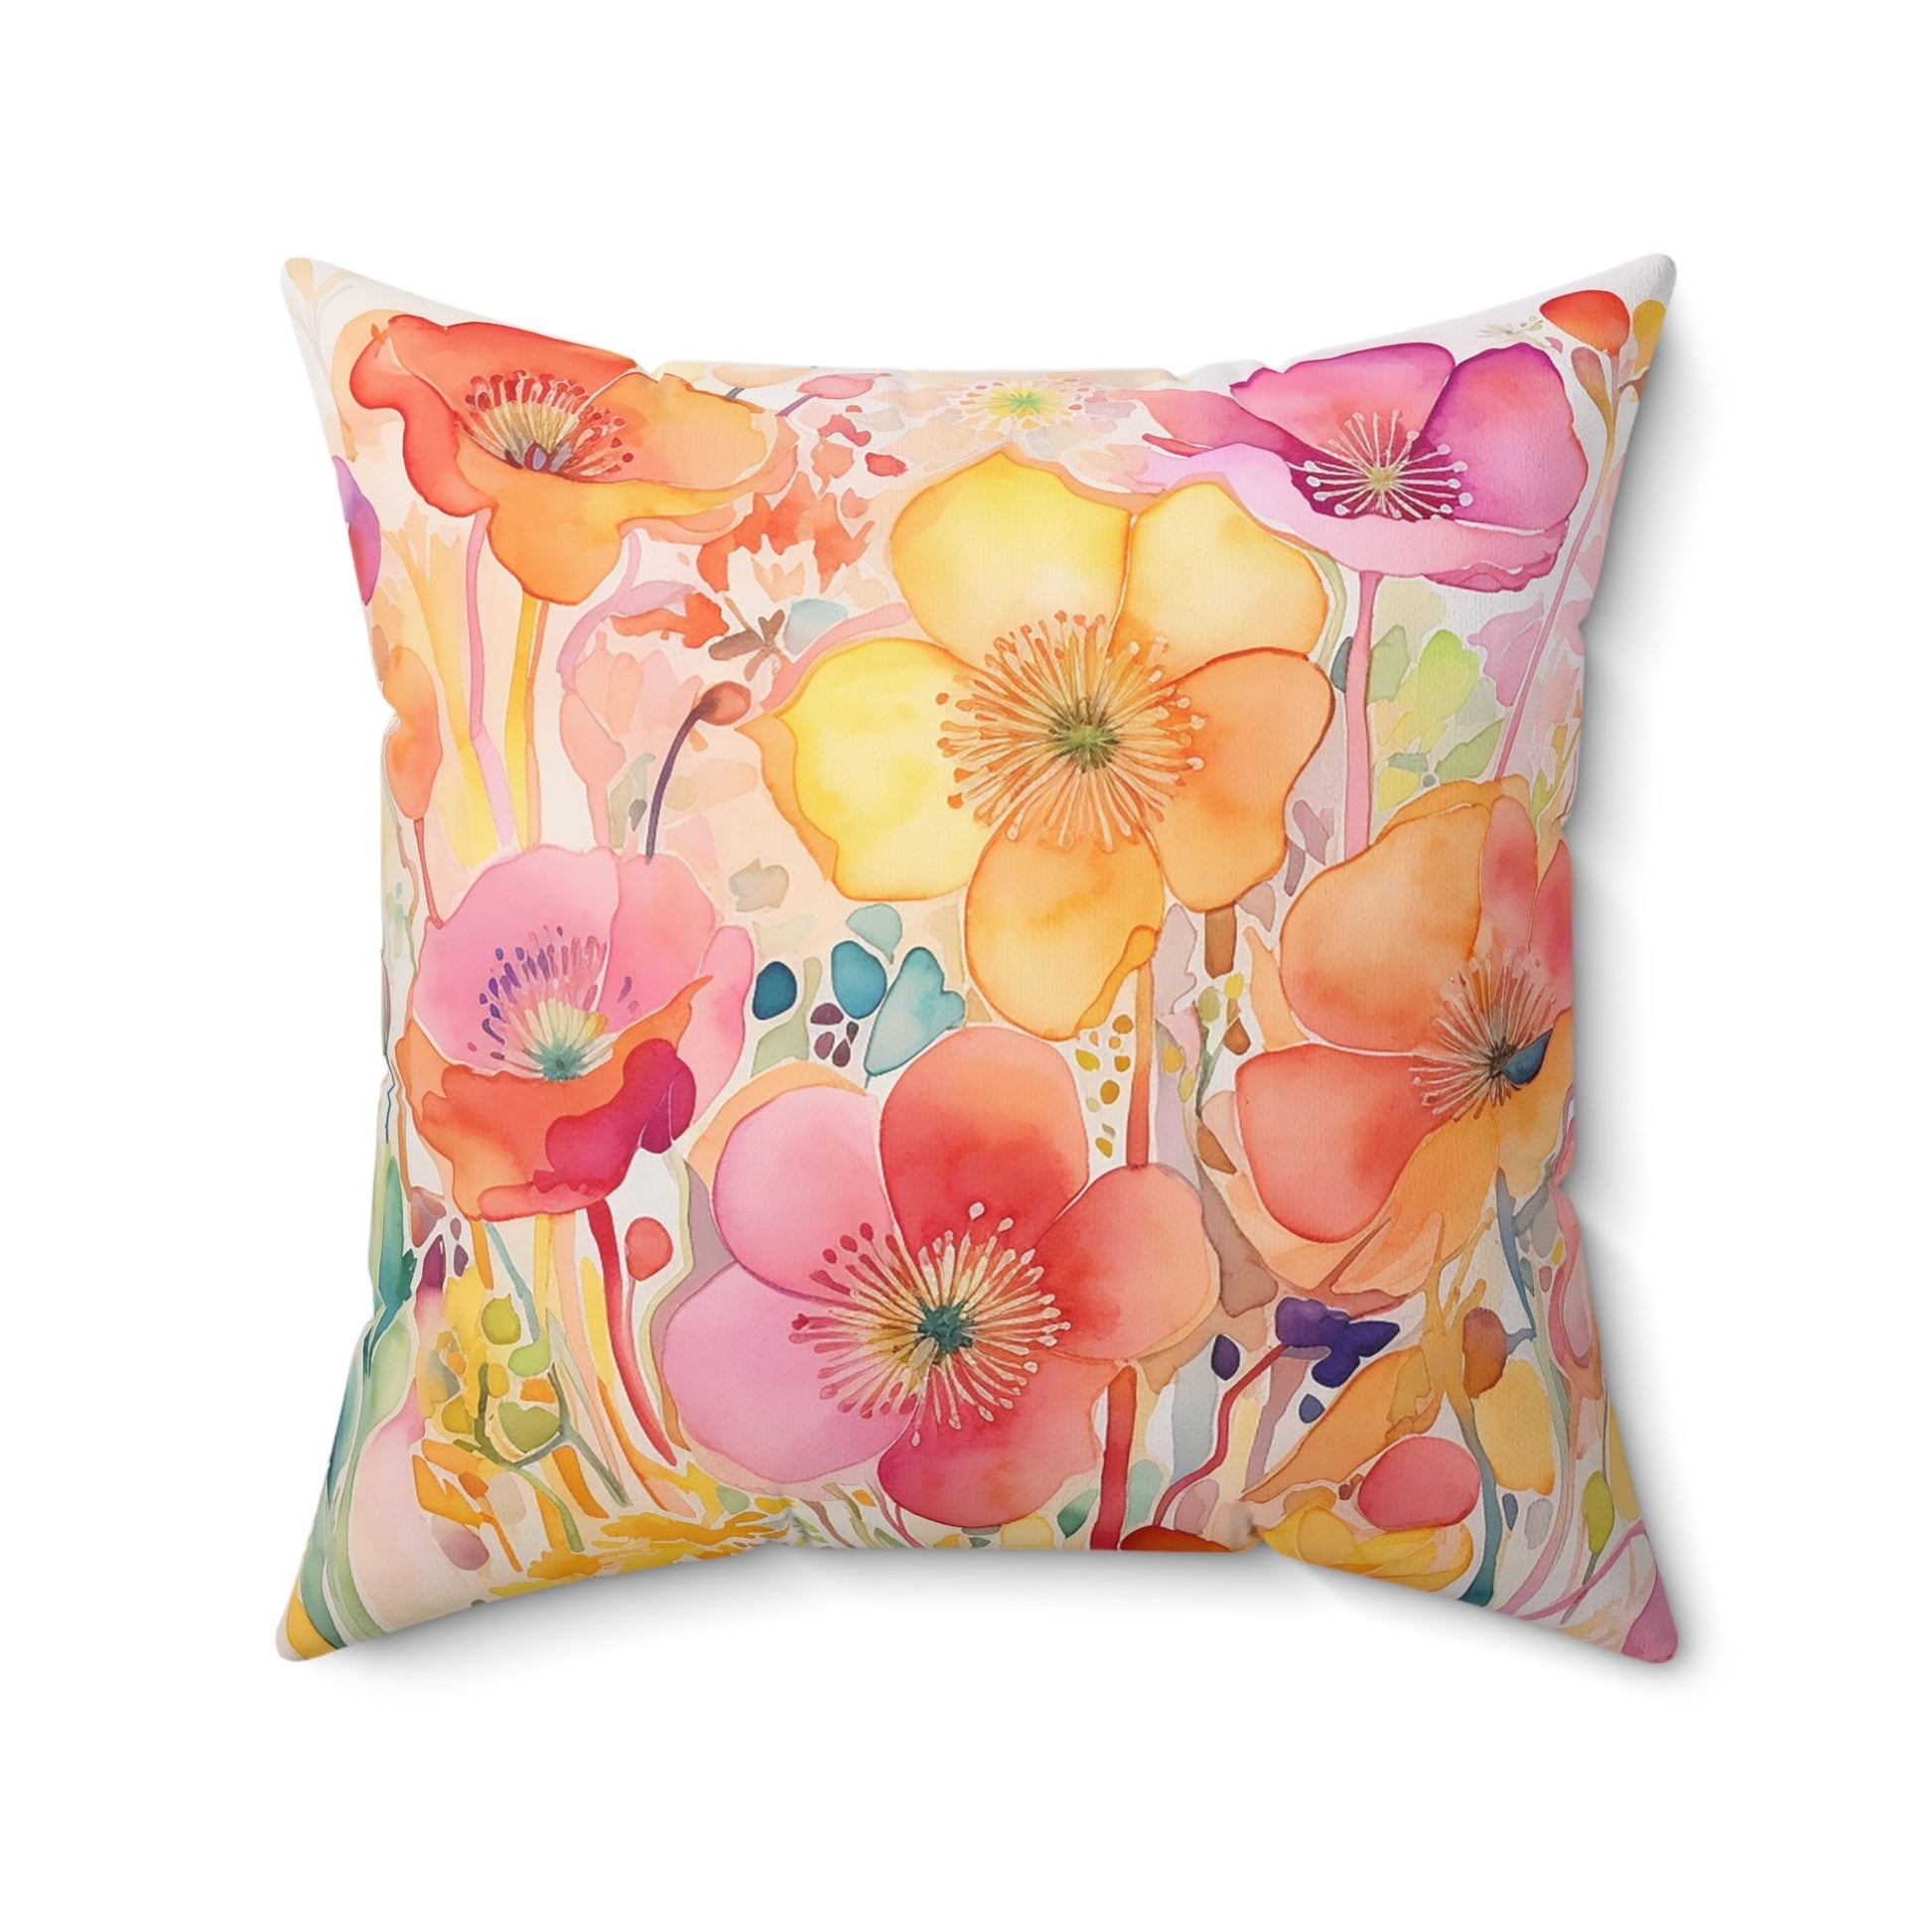 Original Wildflower Pillow, Watercolor, Bright Colors Pillow Cover, Floral Colors Pillow Cover, Useful Gift for Her, Spring Pillow Covers - FlooredByArt